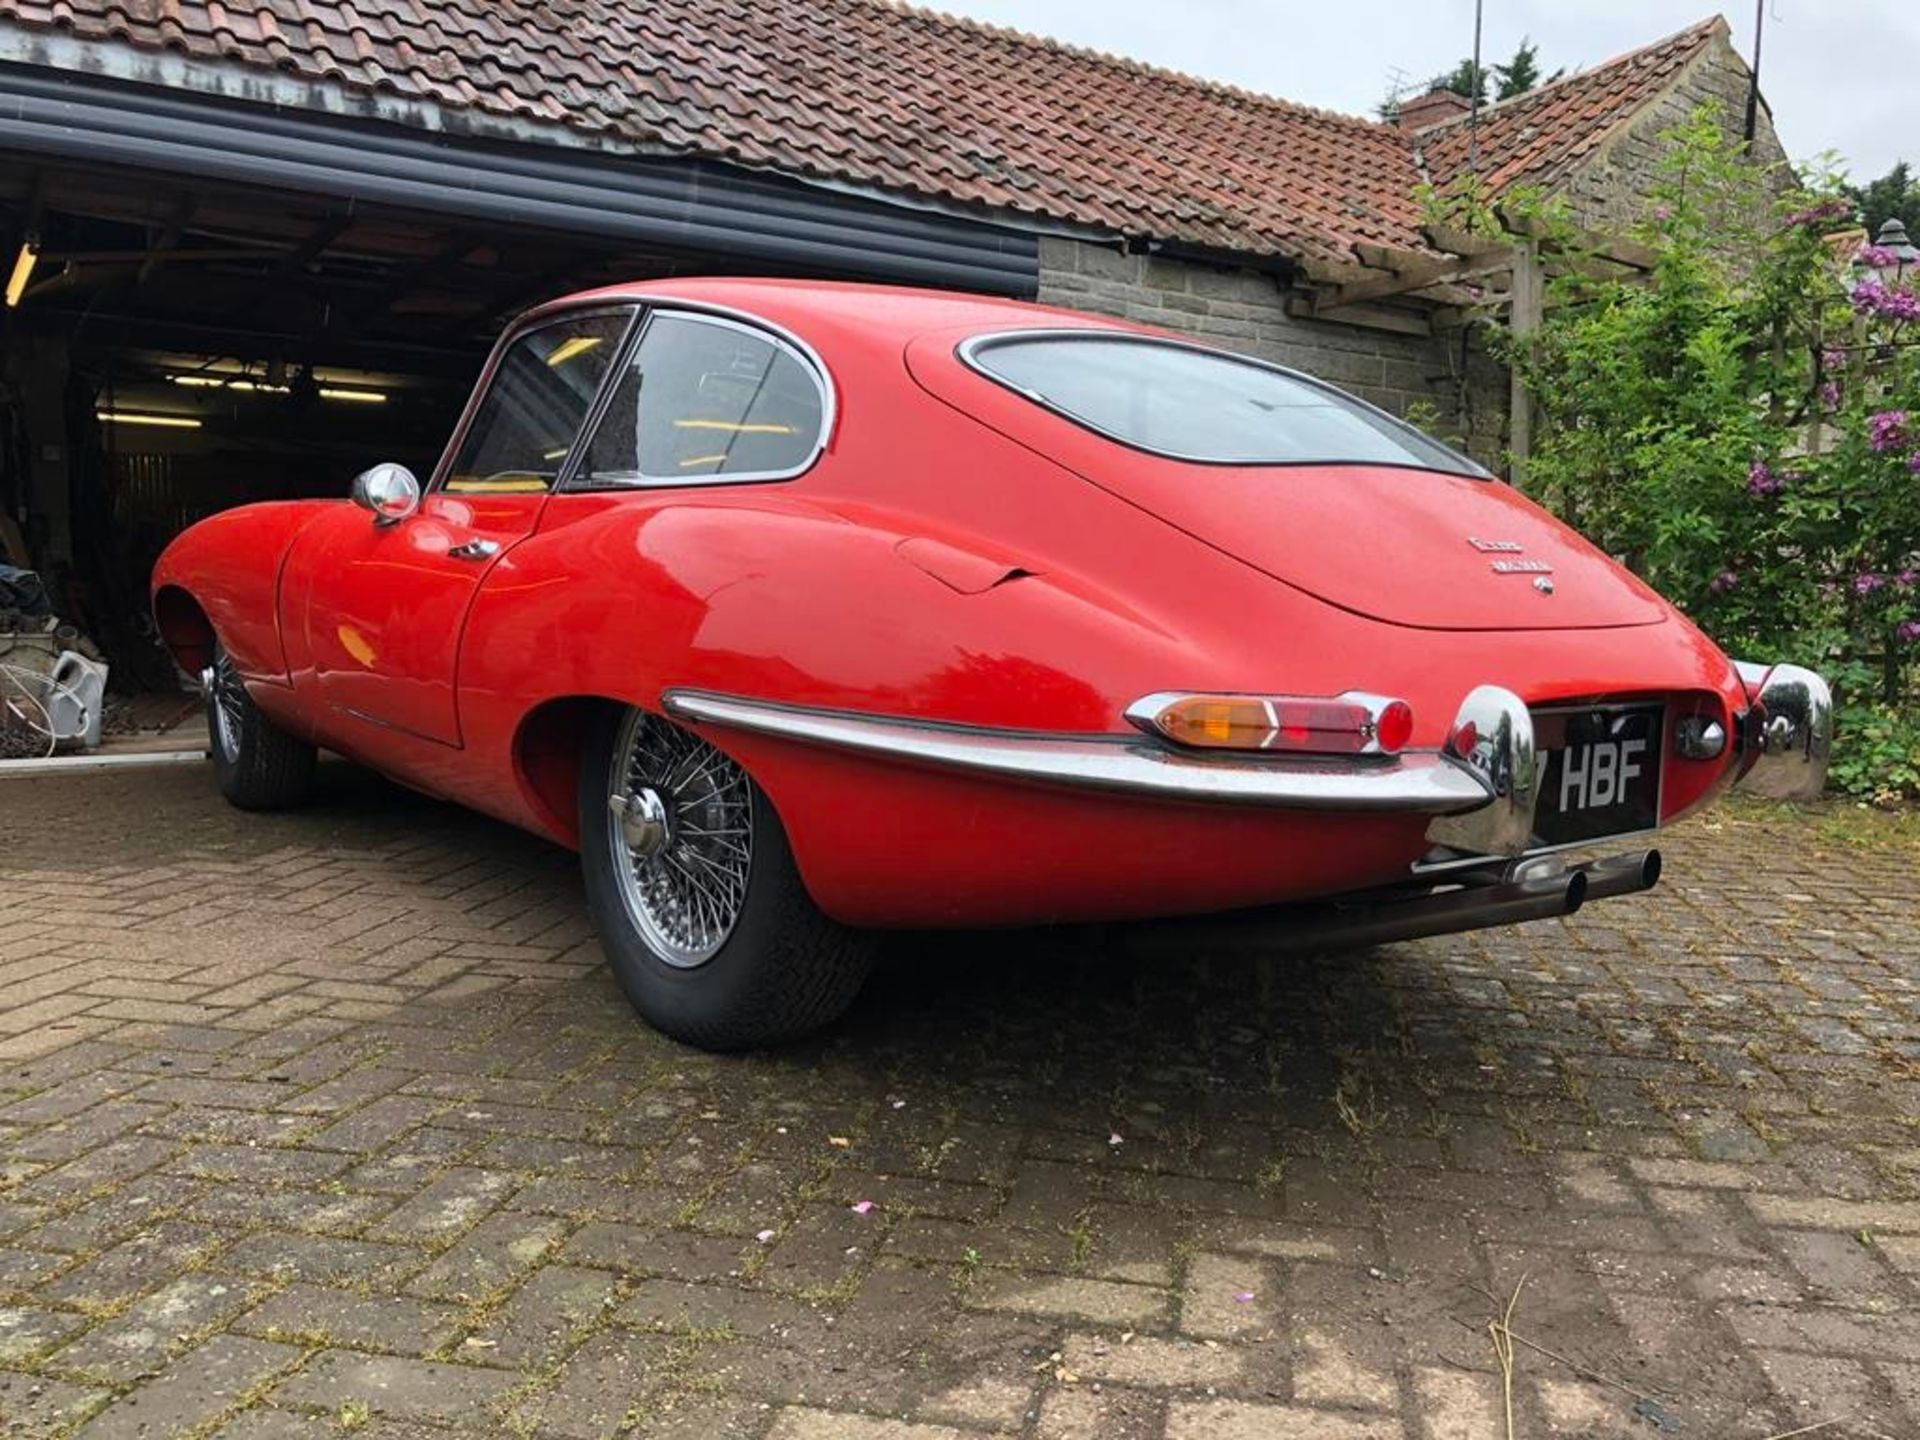 1962 Jaguar E-Type 3.8 Fixed Head Coupé Registration number 297 HBF Chassis number 860773 Engine - Image 53 of 160